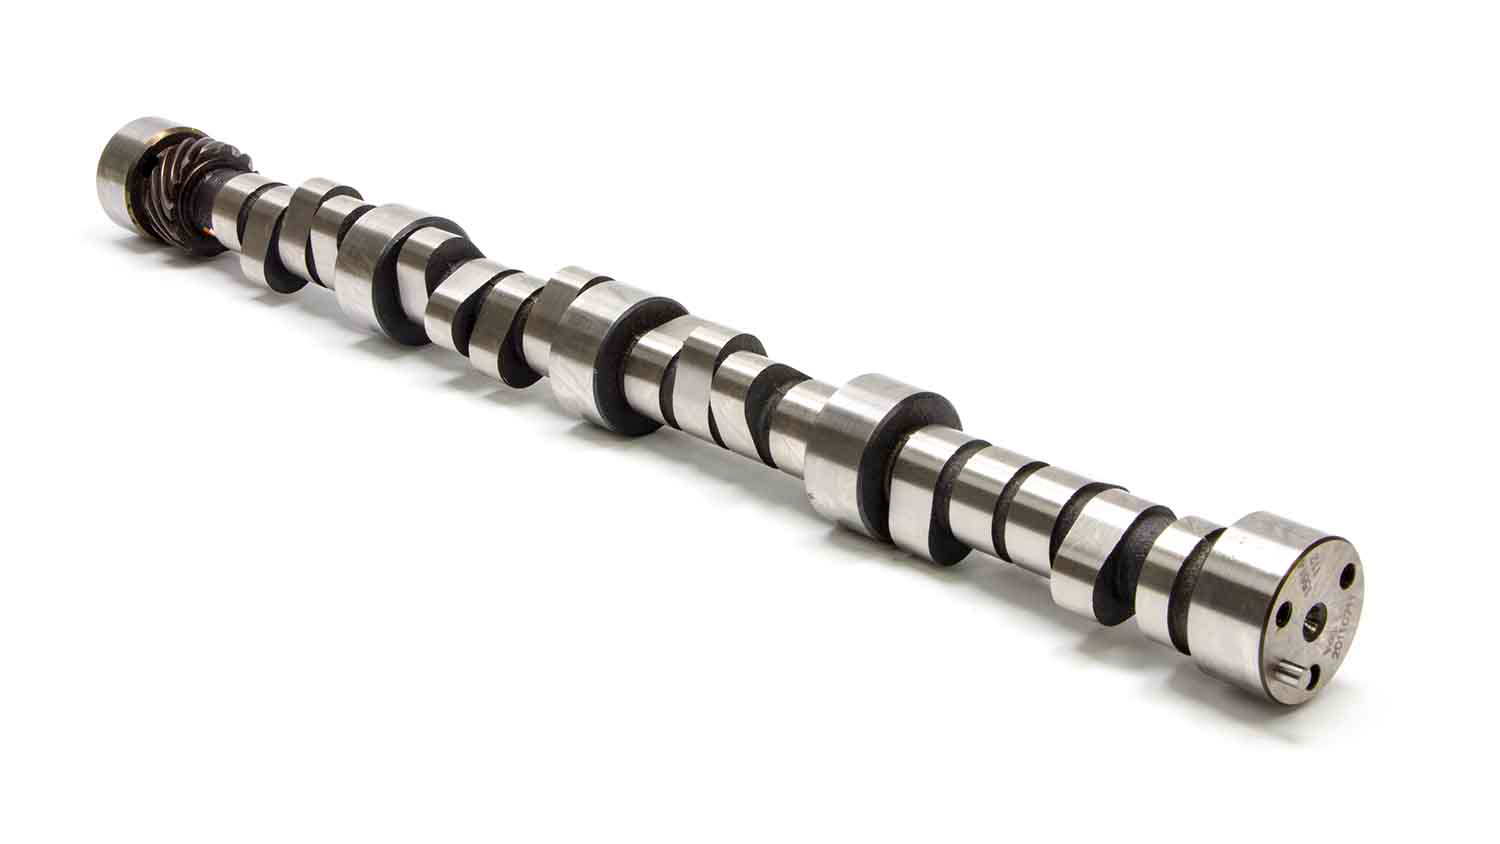 Lunati Cams 20110712 Camshaft, Voodoo Retro-Fit, Hydraulic Roller, Lift 0.600 / 0.600 in, Duration 282 / 290, 110 LSA, 2200 / 6200 RPM, Big Block Chevy, Each